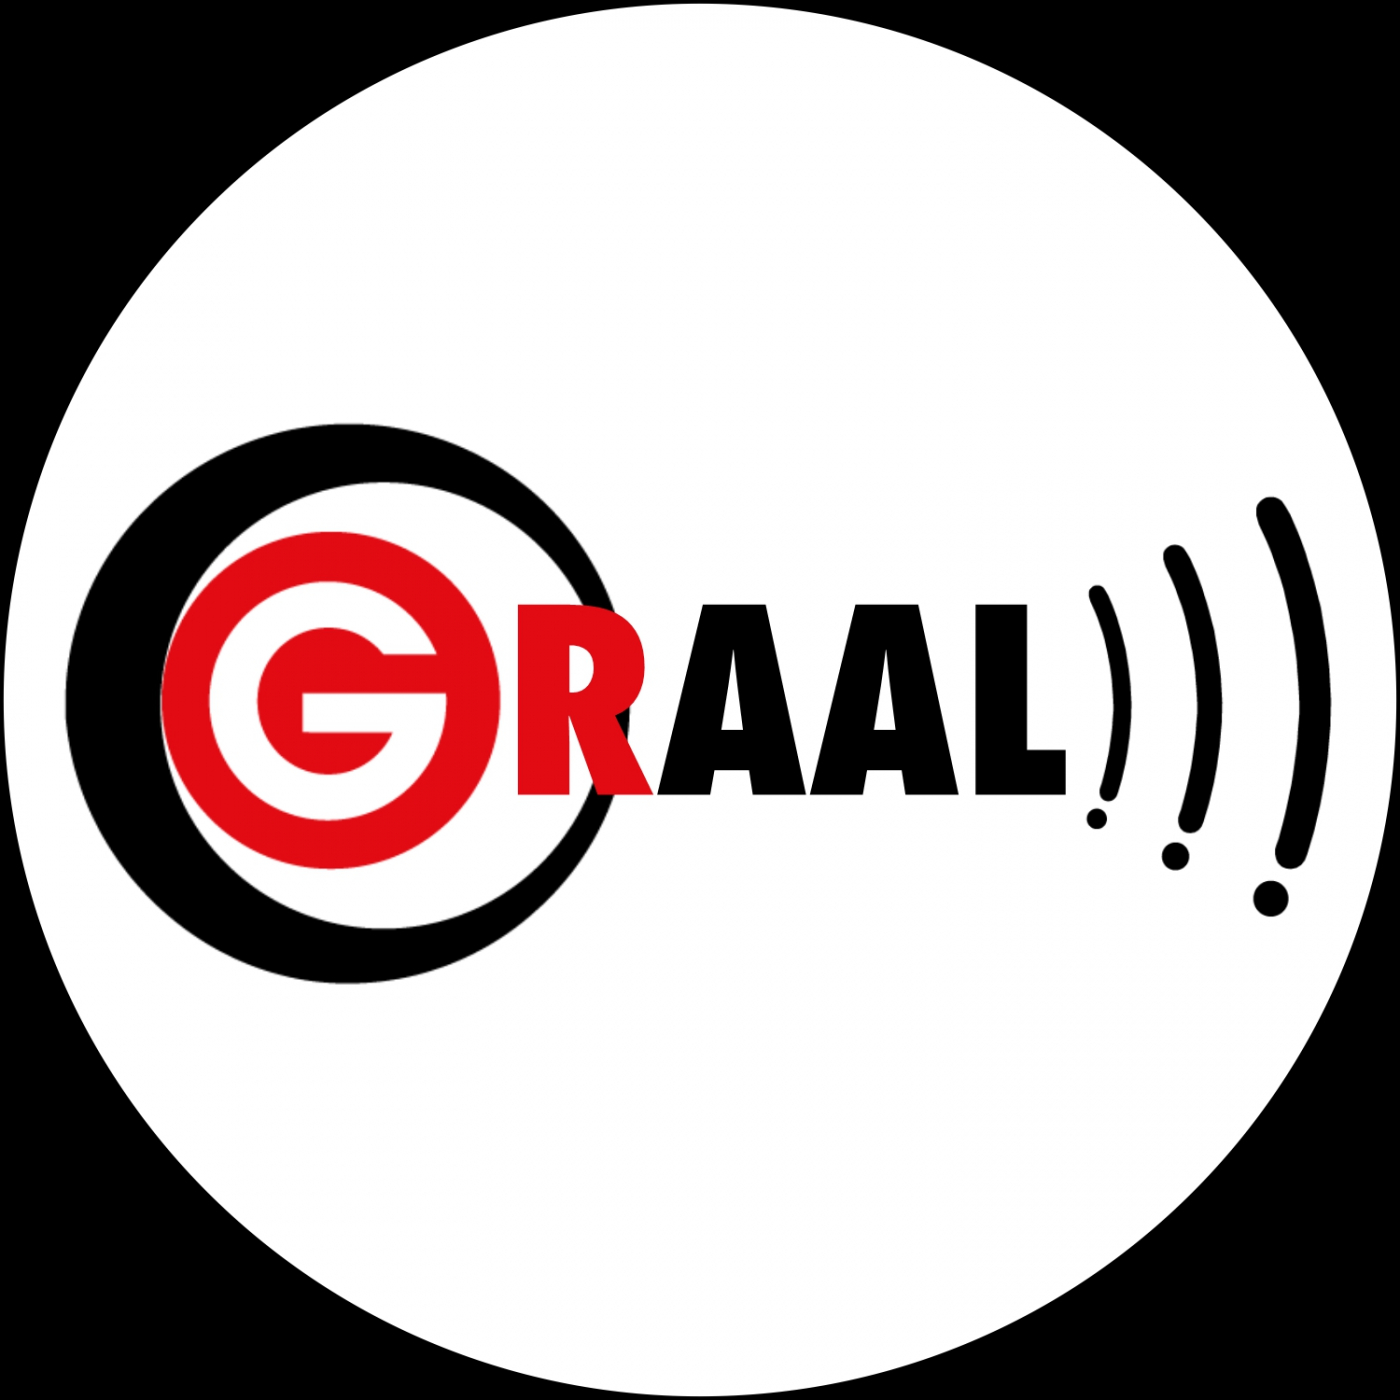 Graal 154 - Le chemsex Question Graal Graal 154 - Le chemsex